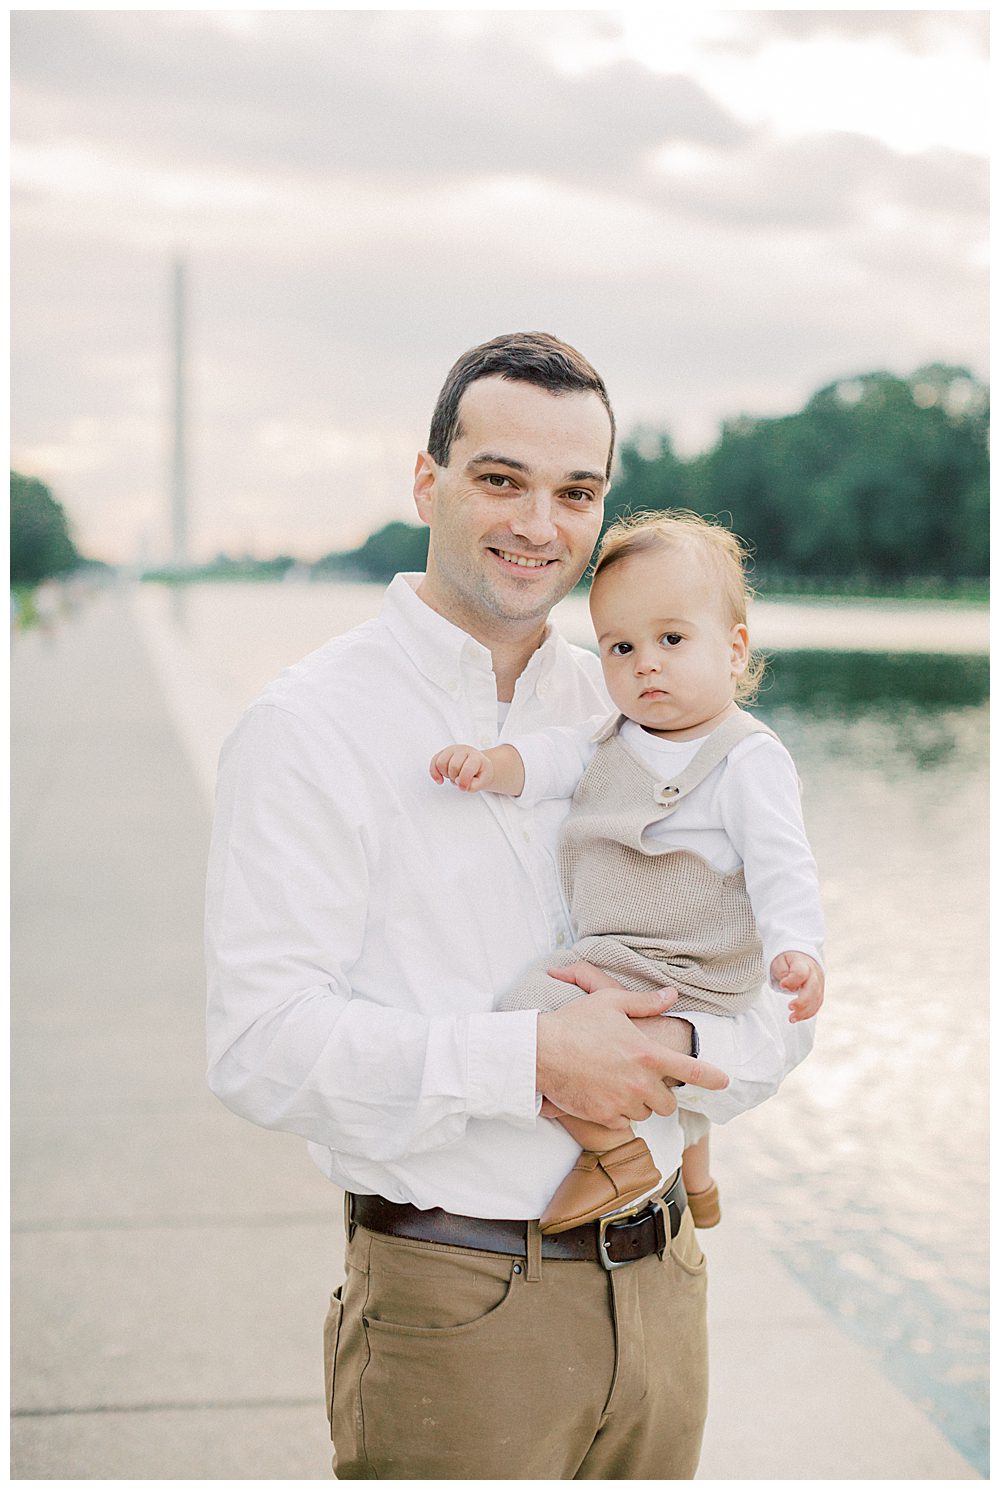 Father holds toddler son and smiles during DC family photo session.